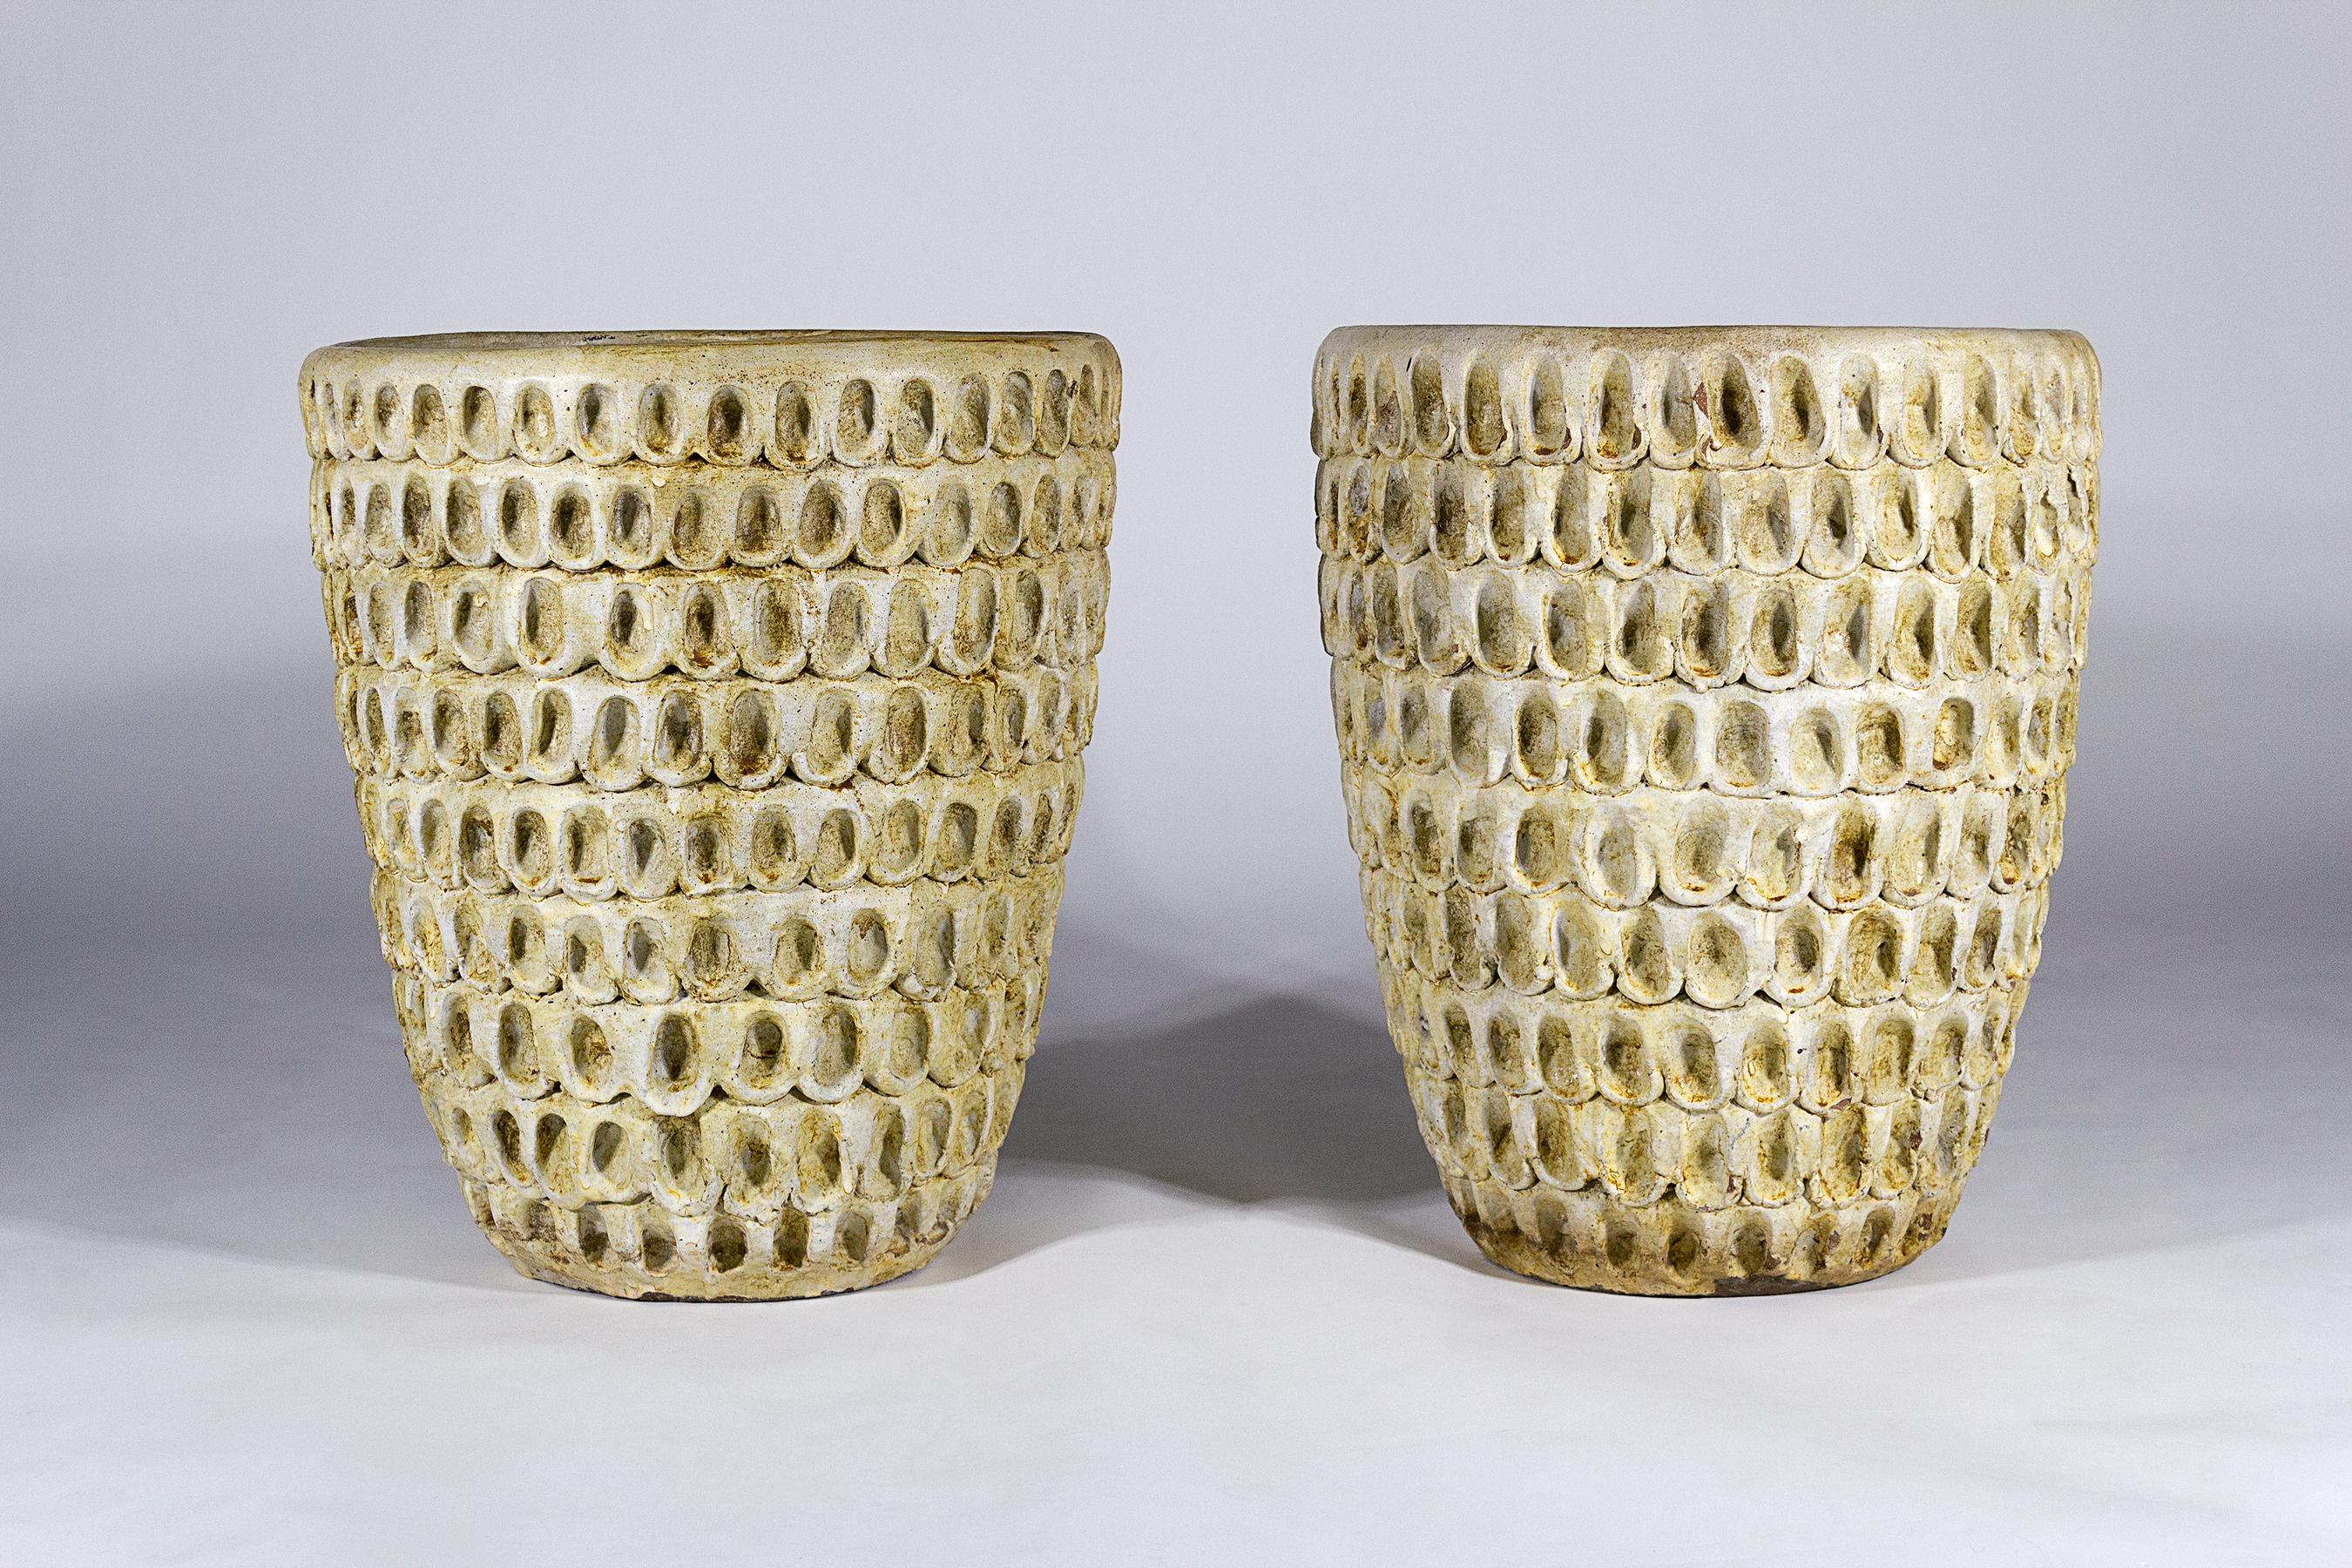 Two Stan Bitters Designed Thumbprint pots made by Sam Trujillo for Ceramic Design. California Modern design at its finest. The price is for the pair of thumb pots.

This pair was originally commissioned for the Marriot Hotel in Anaheim